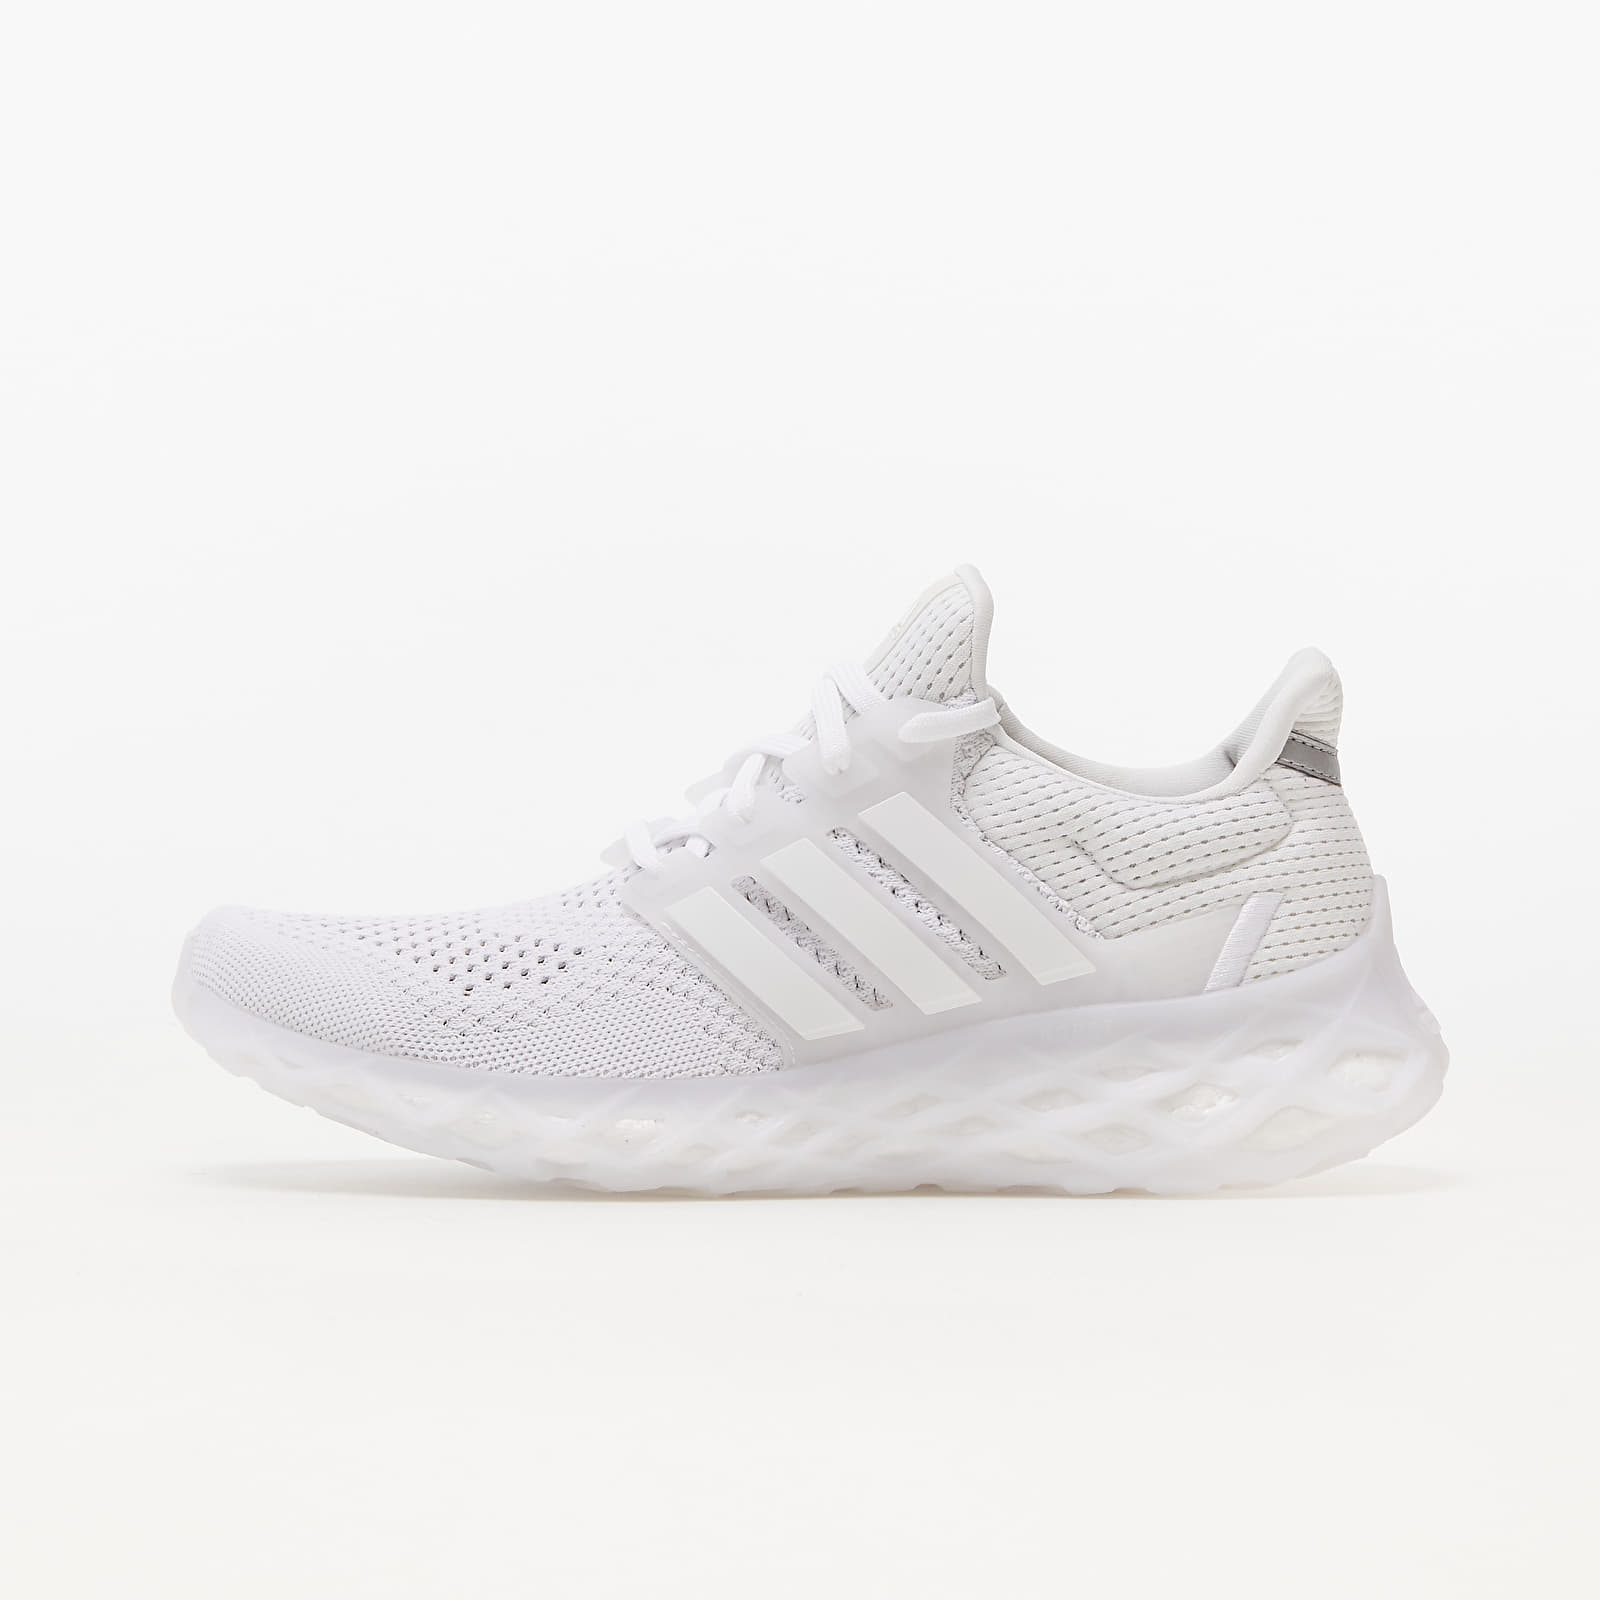 Men's shoes adidas UltraBOOST Web DNA Ftw White/ Ftw White/ Grey One